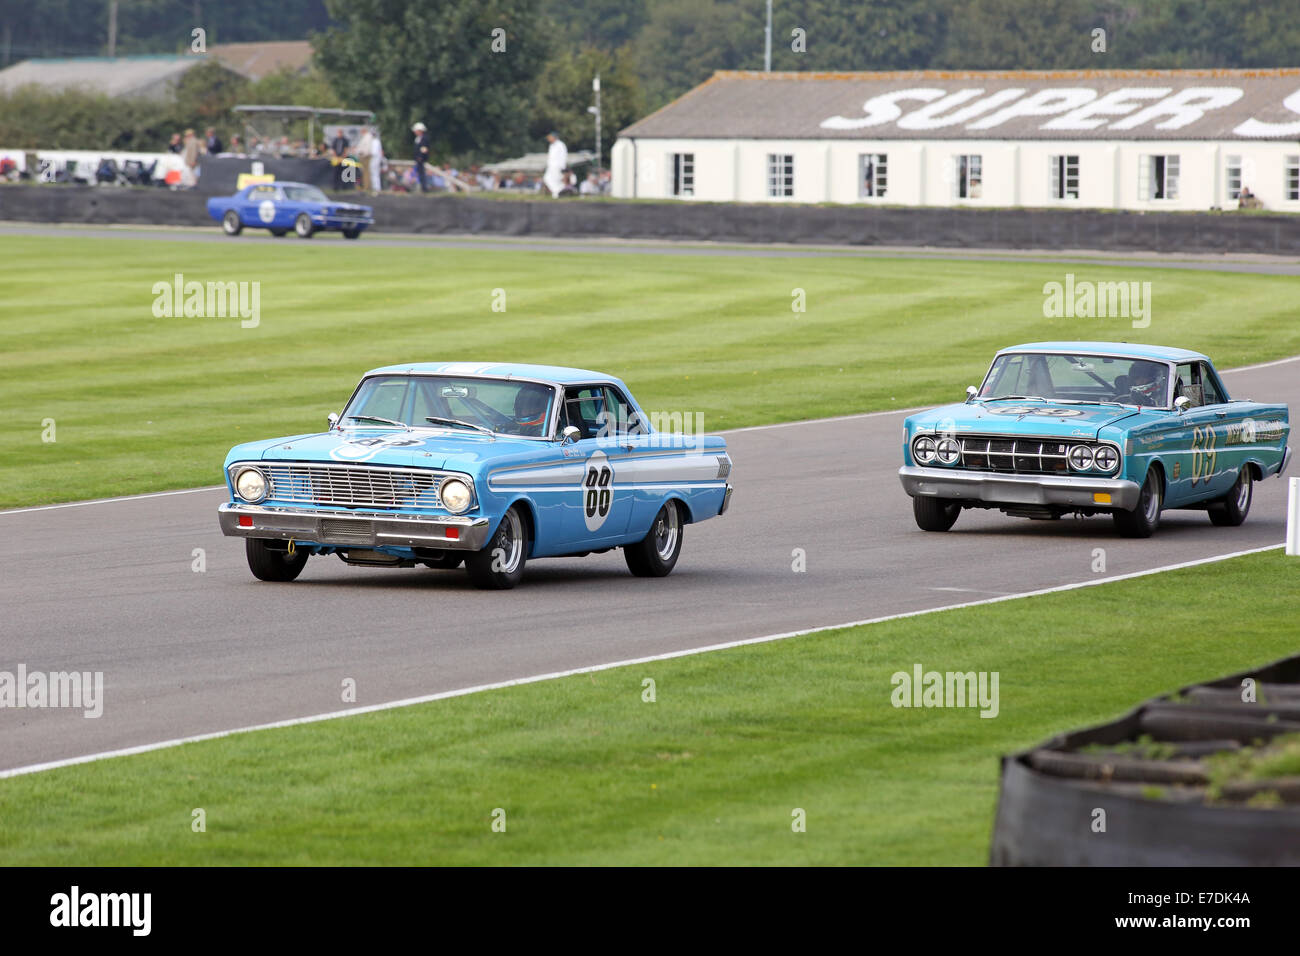 Chichester, West Sussex, UK. 13th Sep, 2014. Pictures from the Goodwood Revival 2014 - The Shelby Cup - A race for saloon cars powered by small-block V8 engines on the 60th anniversary of the small-block V8 engine. A large number of Ford Mustangs mariking the car's 50th anniversary took on other American classics such as Ford Falcon, Plymouth Barracuda, Mercury Comet Cyclone and Dodge Dart. Picture shows: a 1964 Ford Falcon Spirit Credit:  Oliver Dixon/Alamy Live News Stock Photo